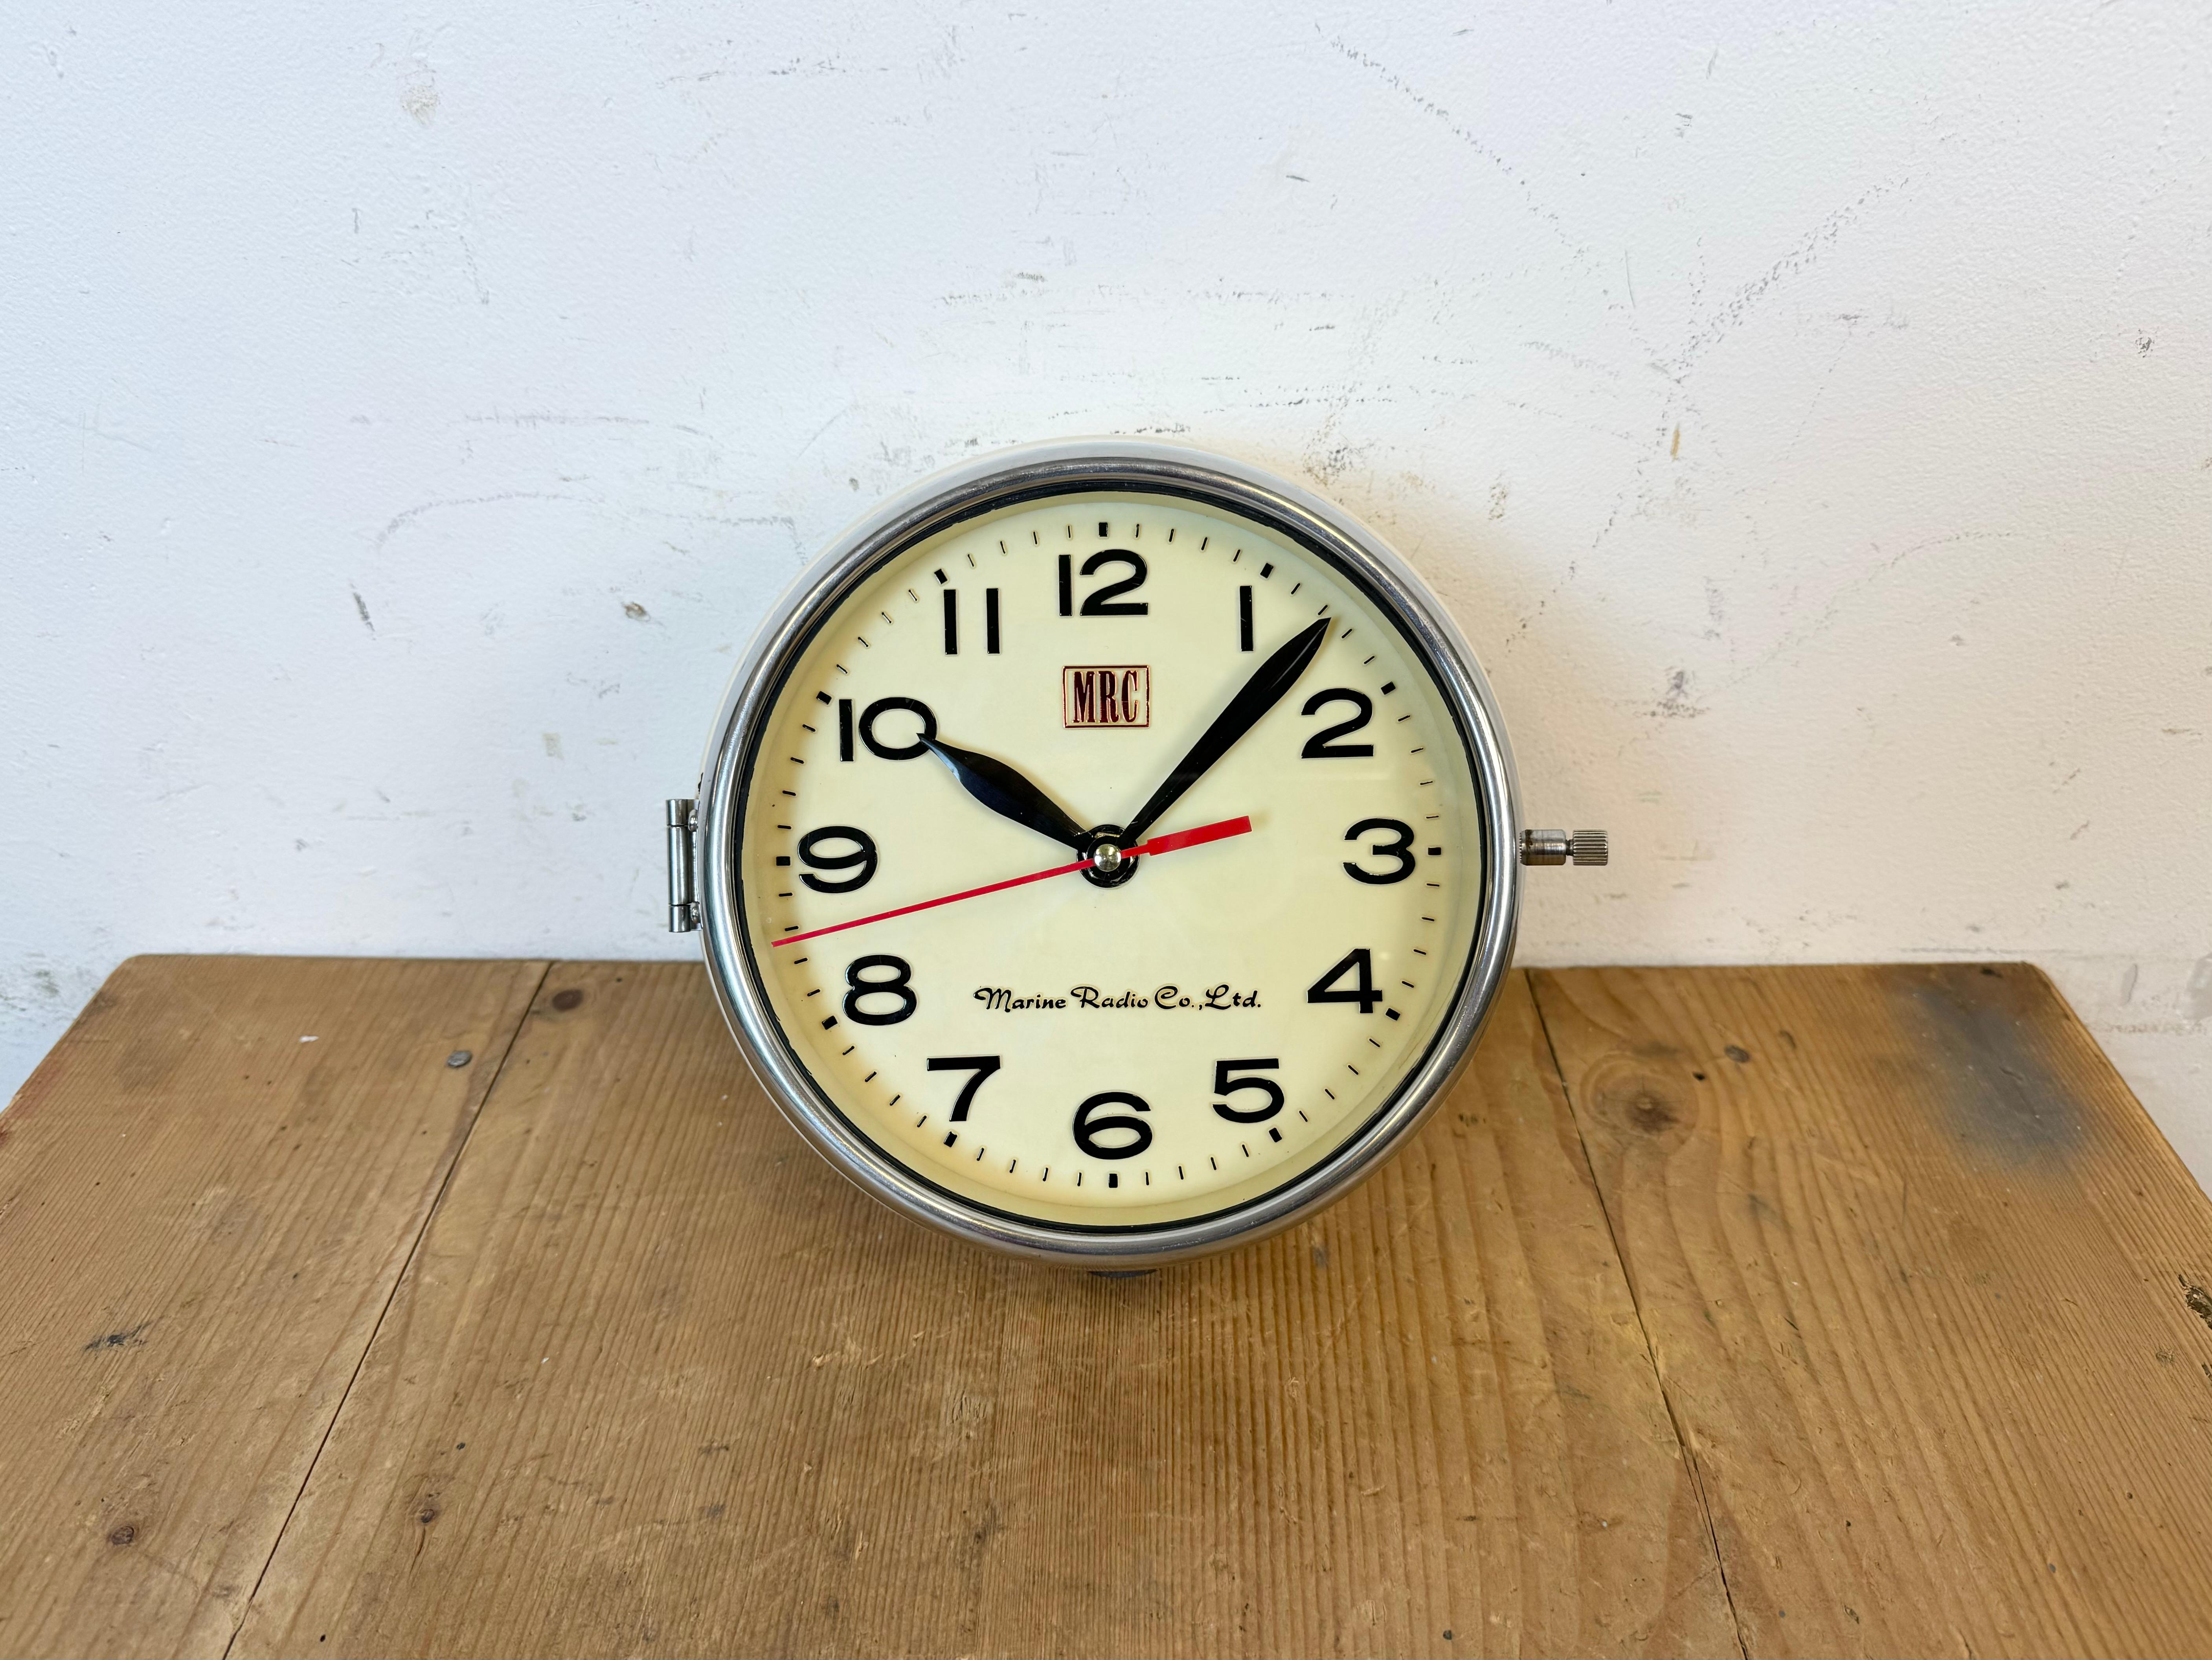 Vintage MRC ( Marine Radio Co. Ltd. ) maritime slave clock made in South Korea during the 1970s. These clocks were used on large Korean tankers and cargo ships. It features a beige metal body, a plastic dial and clear glass cover with chrome frame.